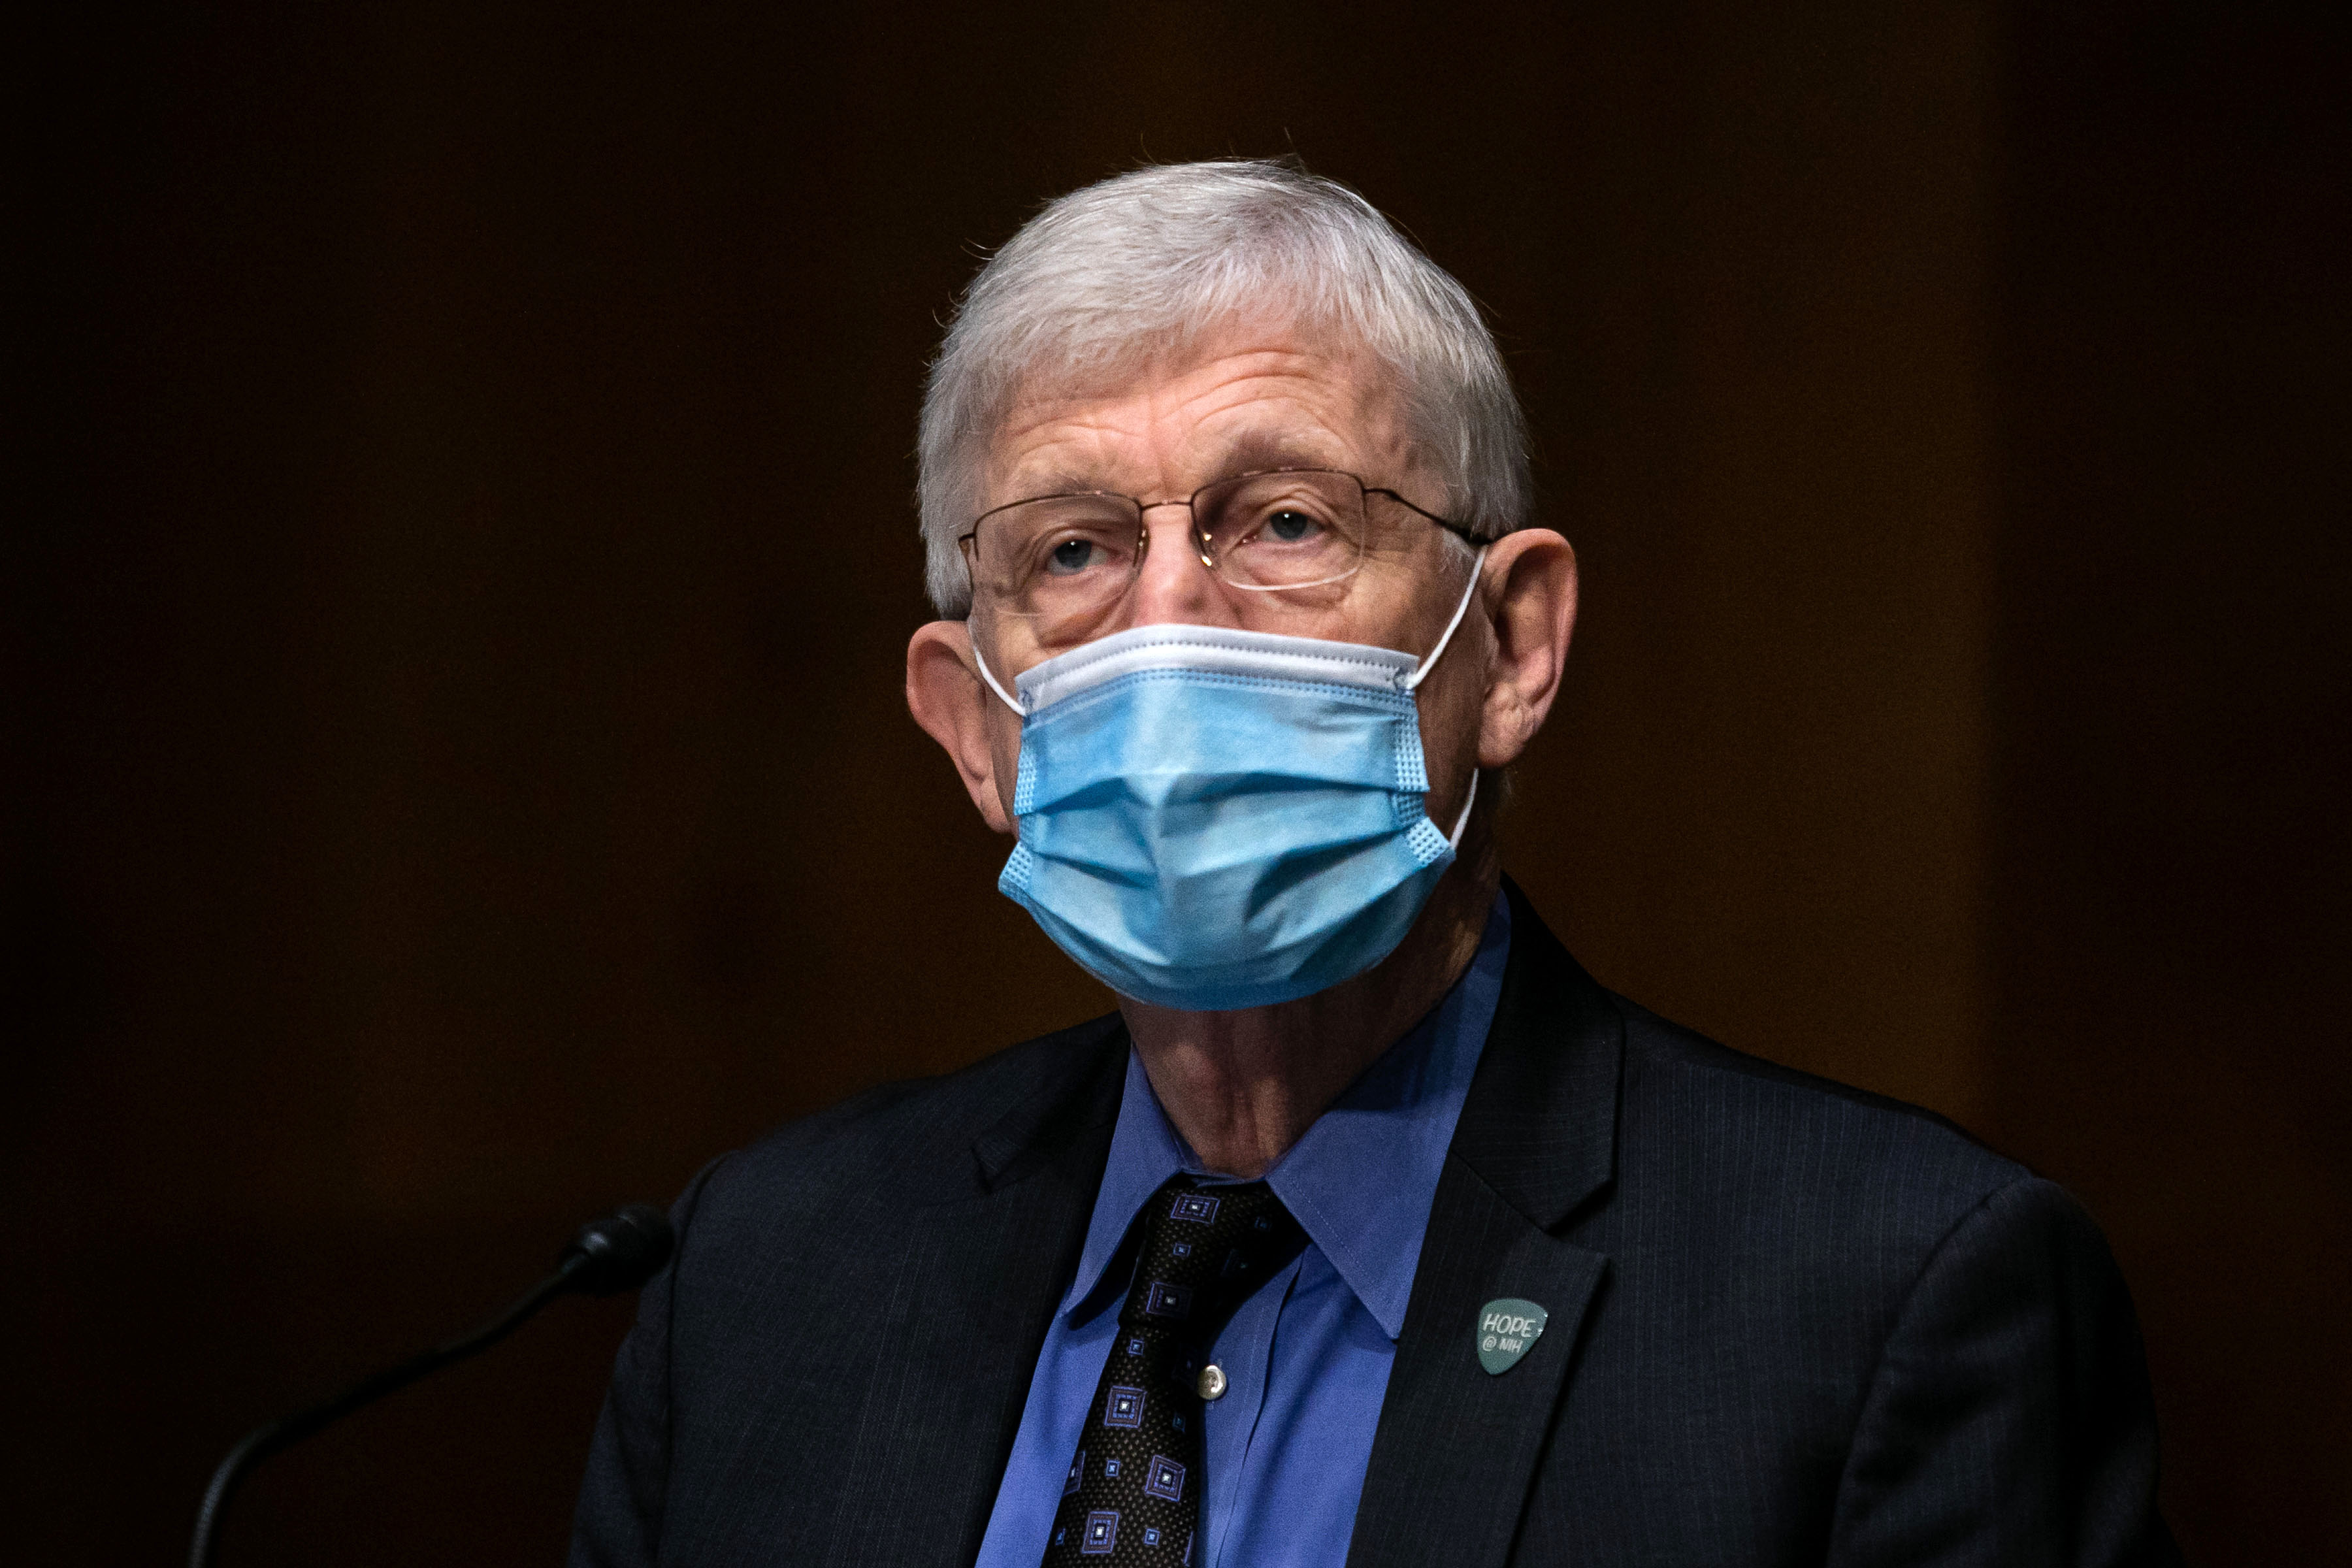 Dr. Francis Collins testifies at a hearing in Washington, DC, on July 2.